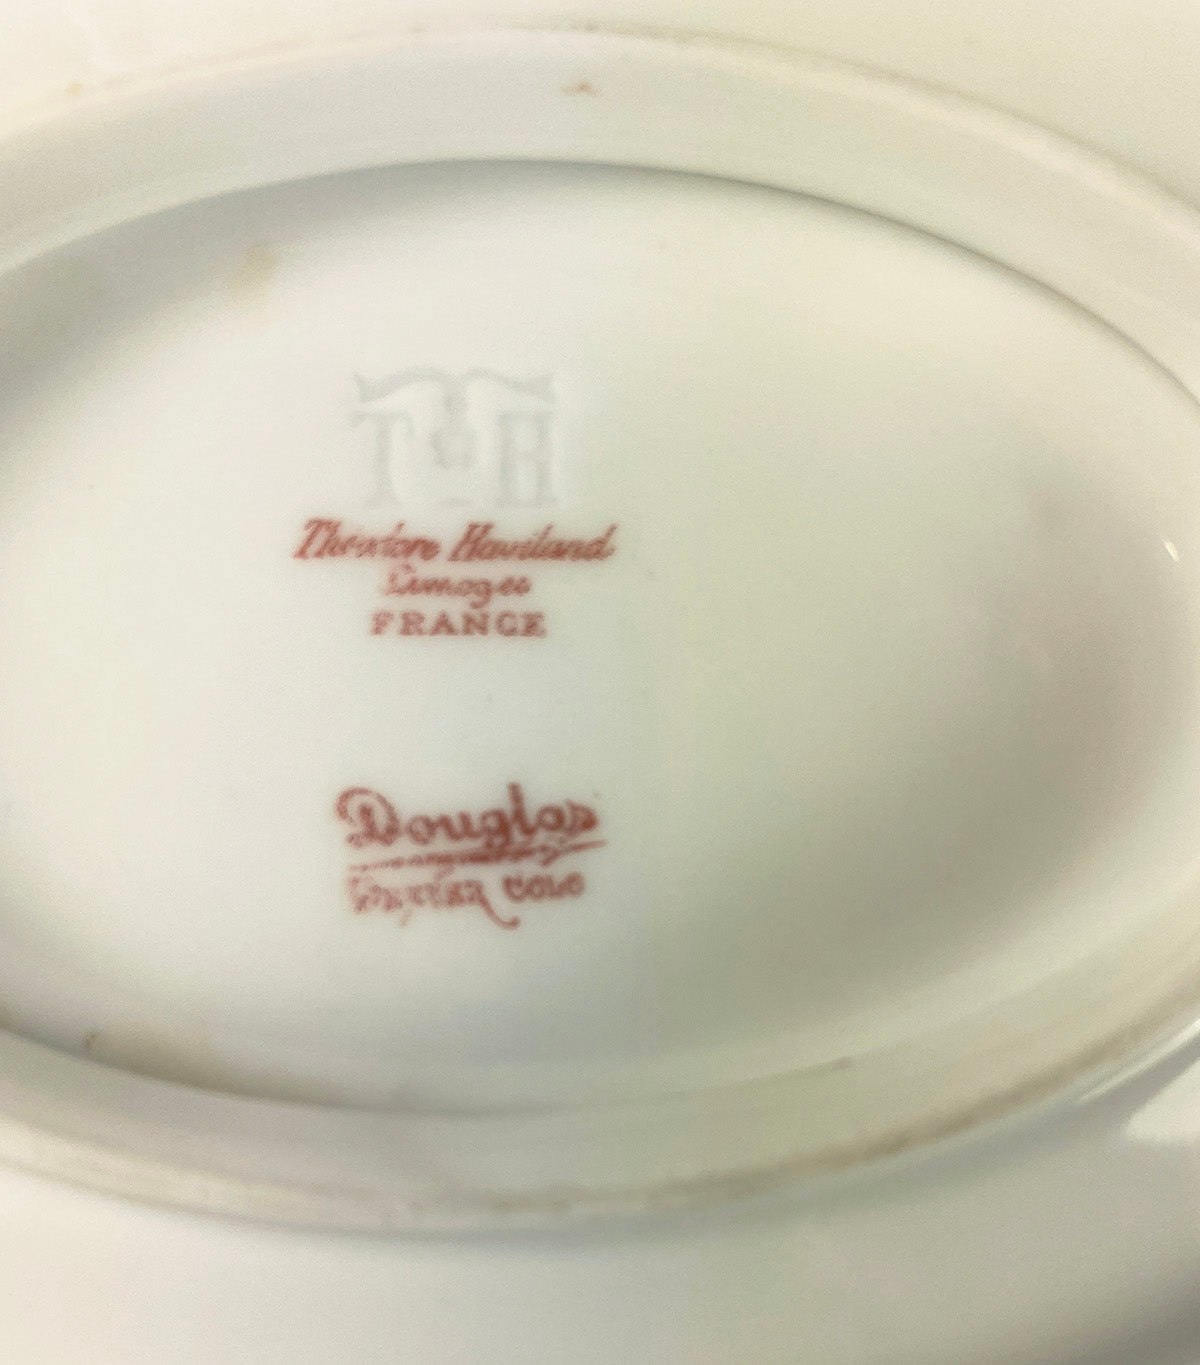 Antique Haviland Limoge French Porcelain Pair, 16.5" Tray or Platter and 10" Gravy or Sauce Boat